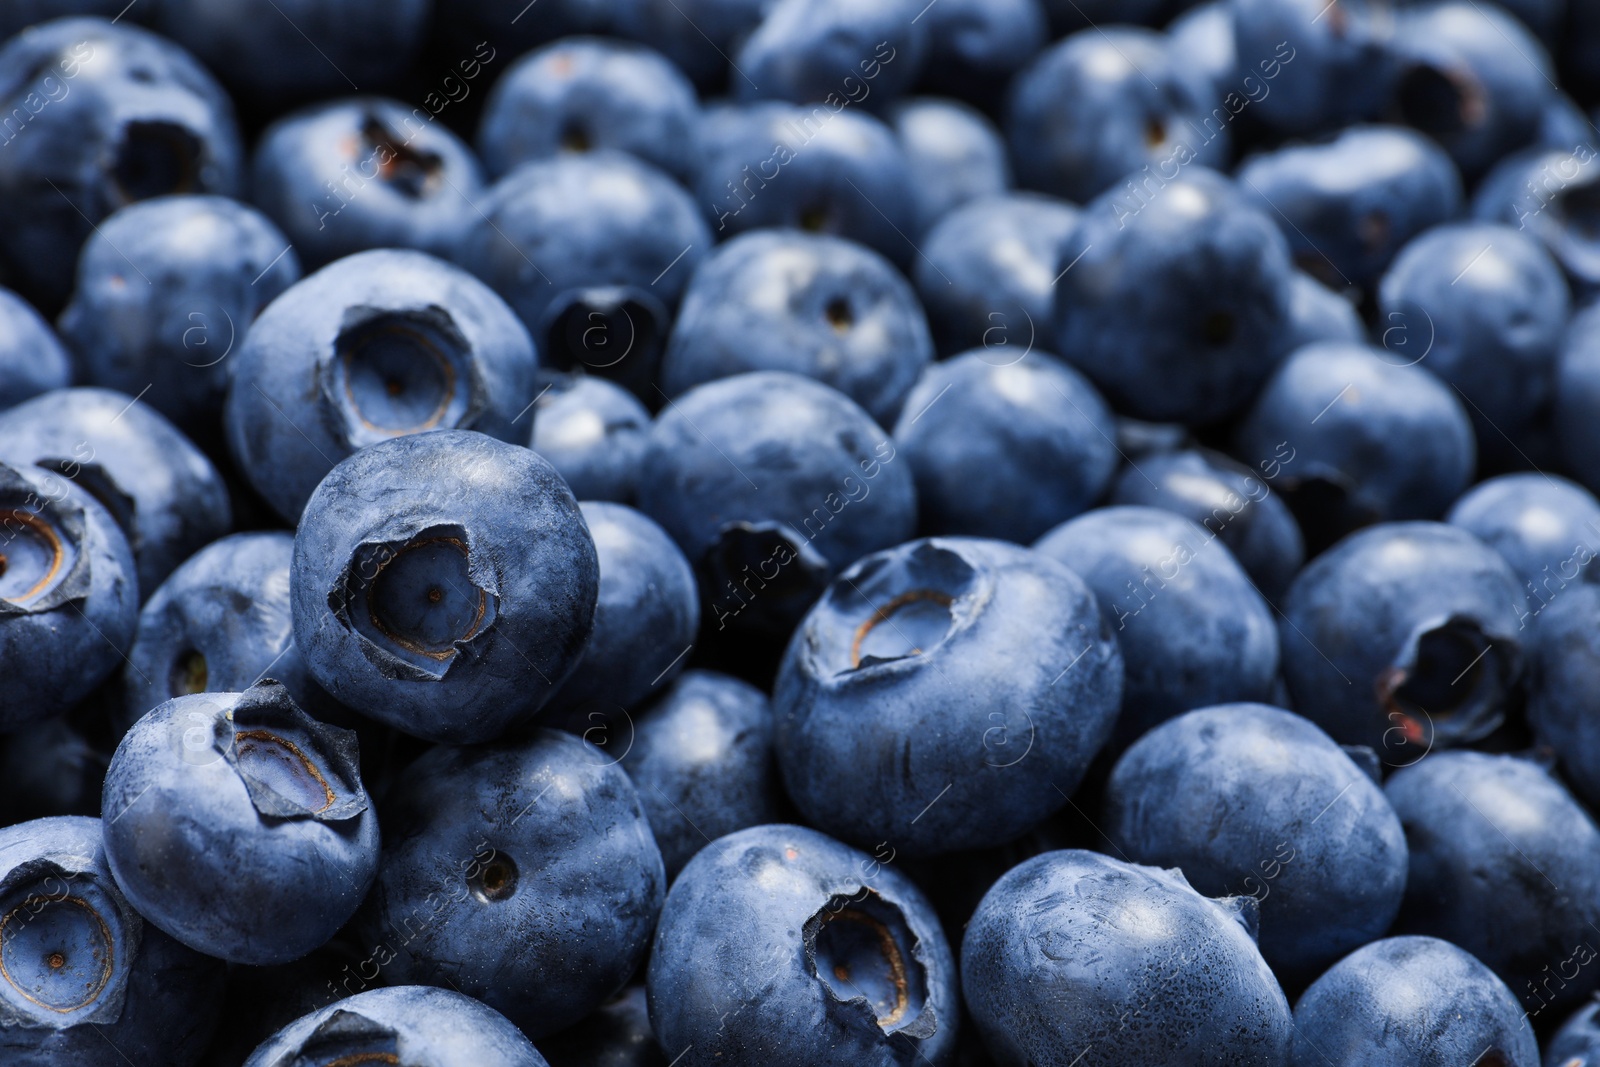 Photo of Tasty fresh blueberries as background, closeup view